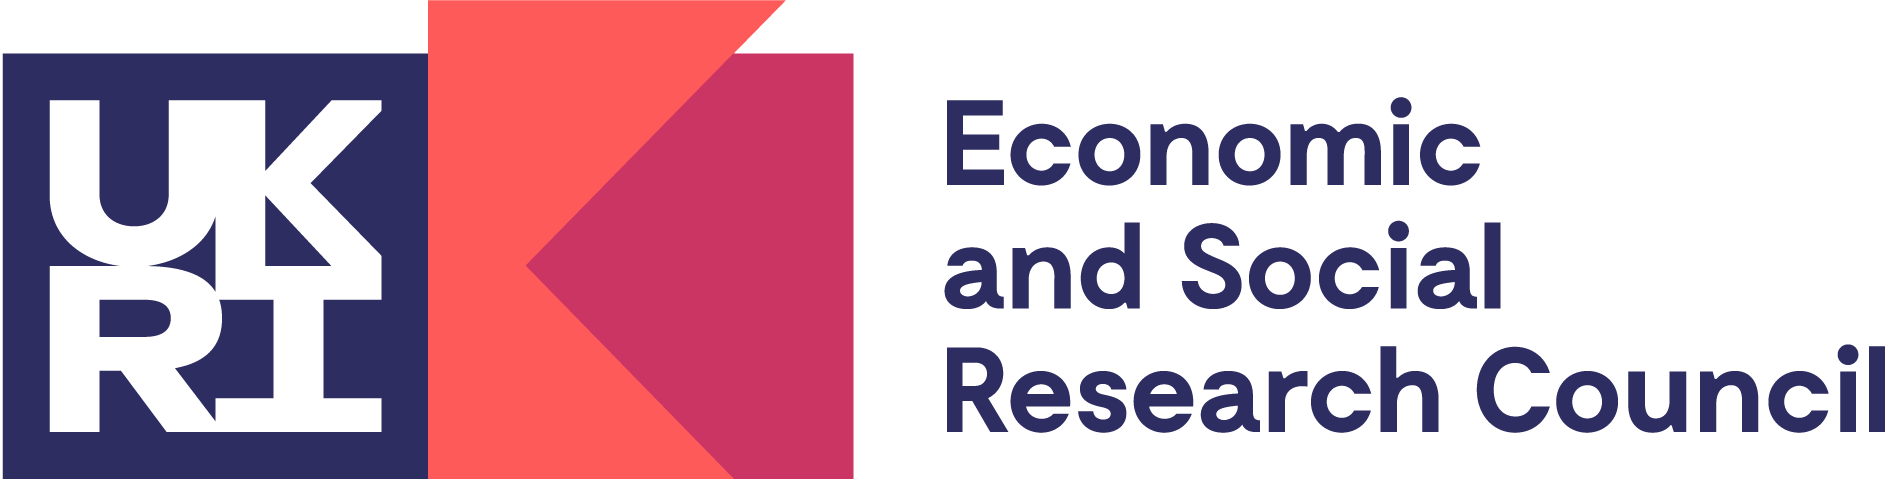 UKRI logo for the Economic and Social Research Council